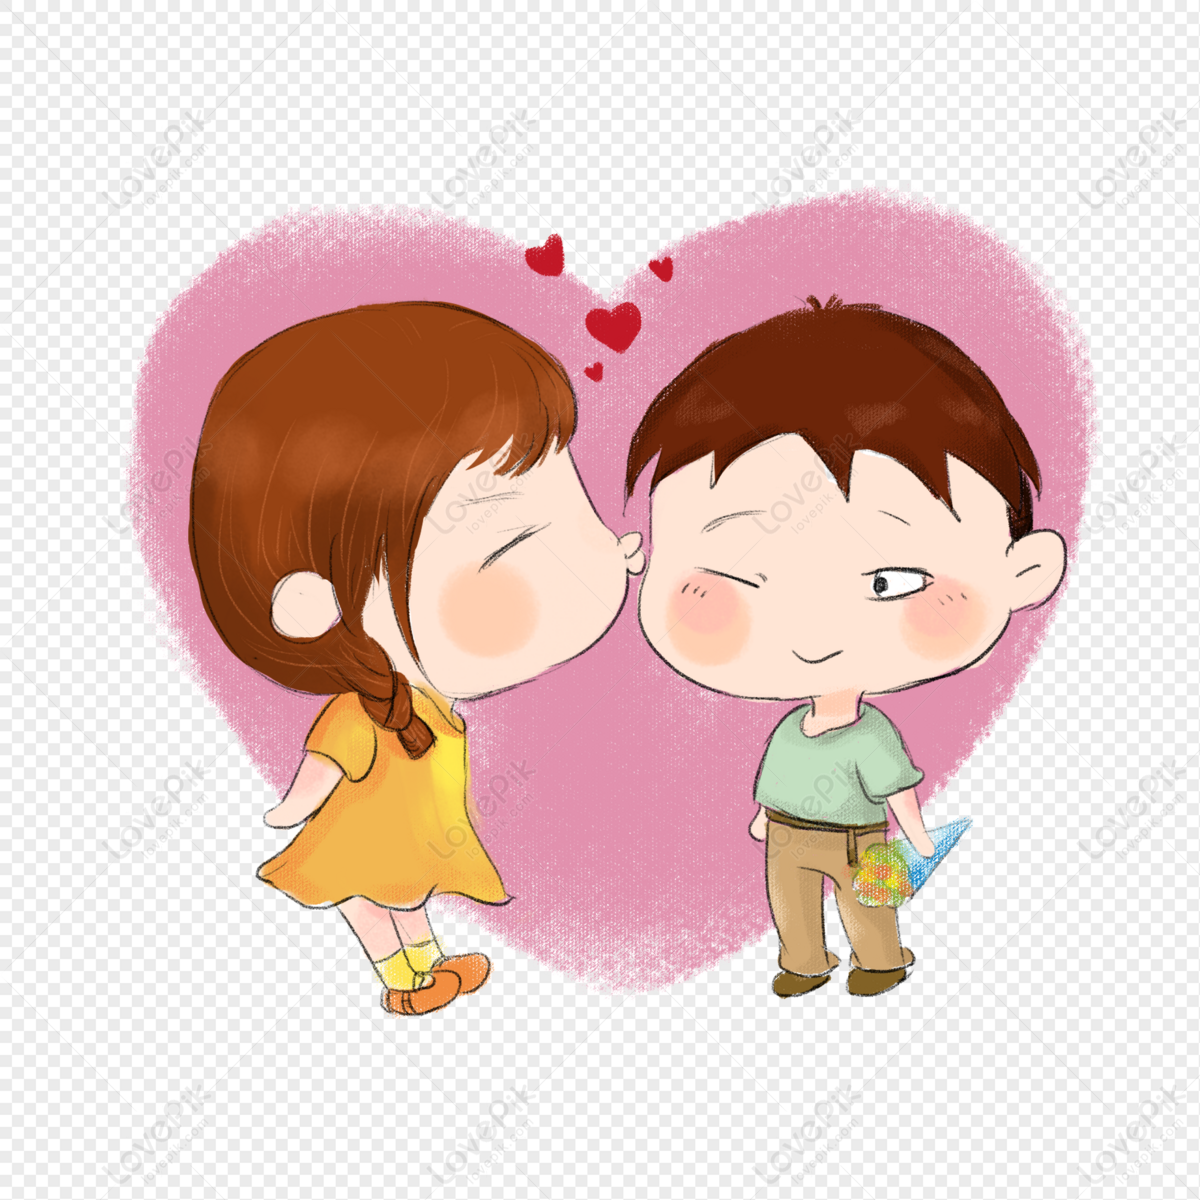 download cute images of love